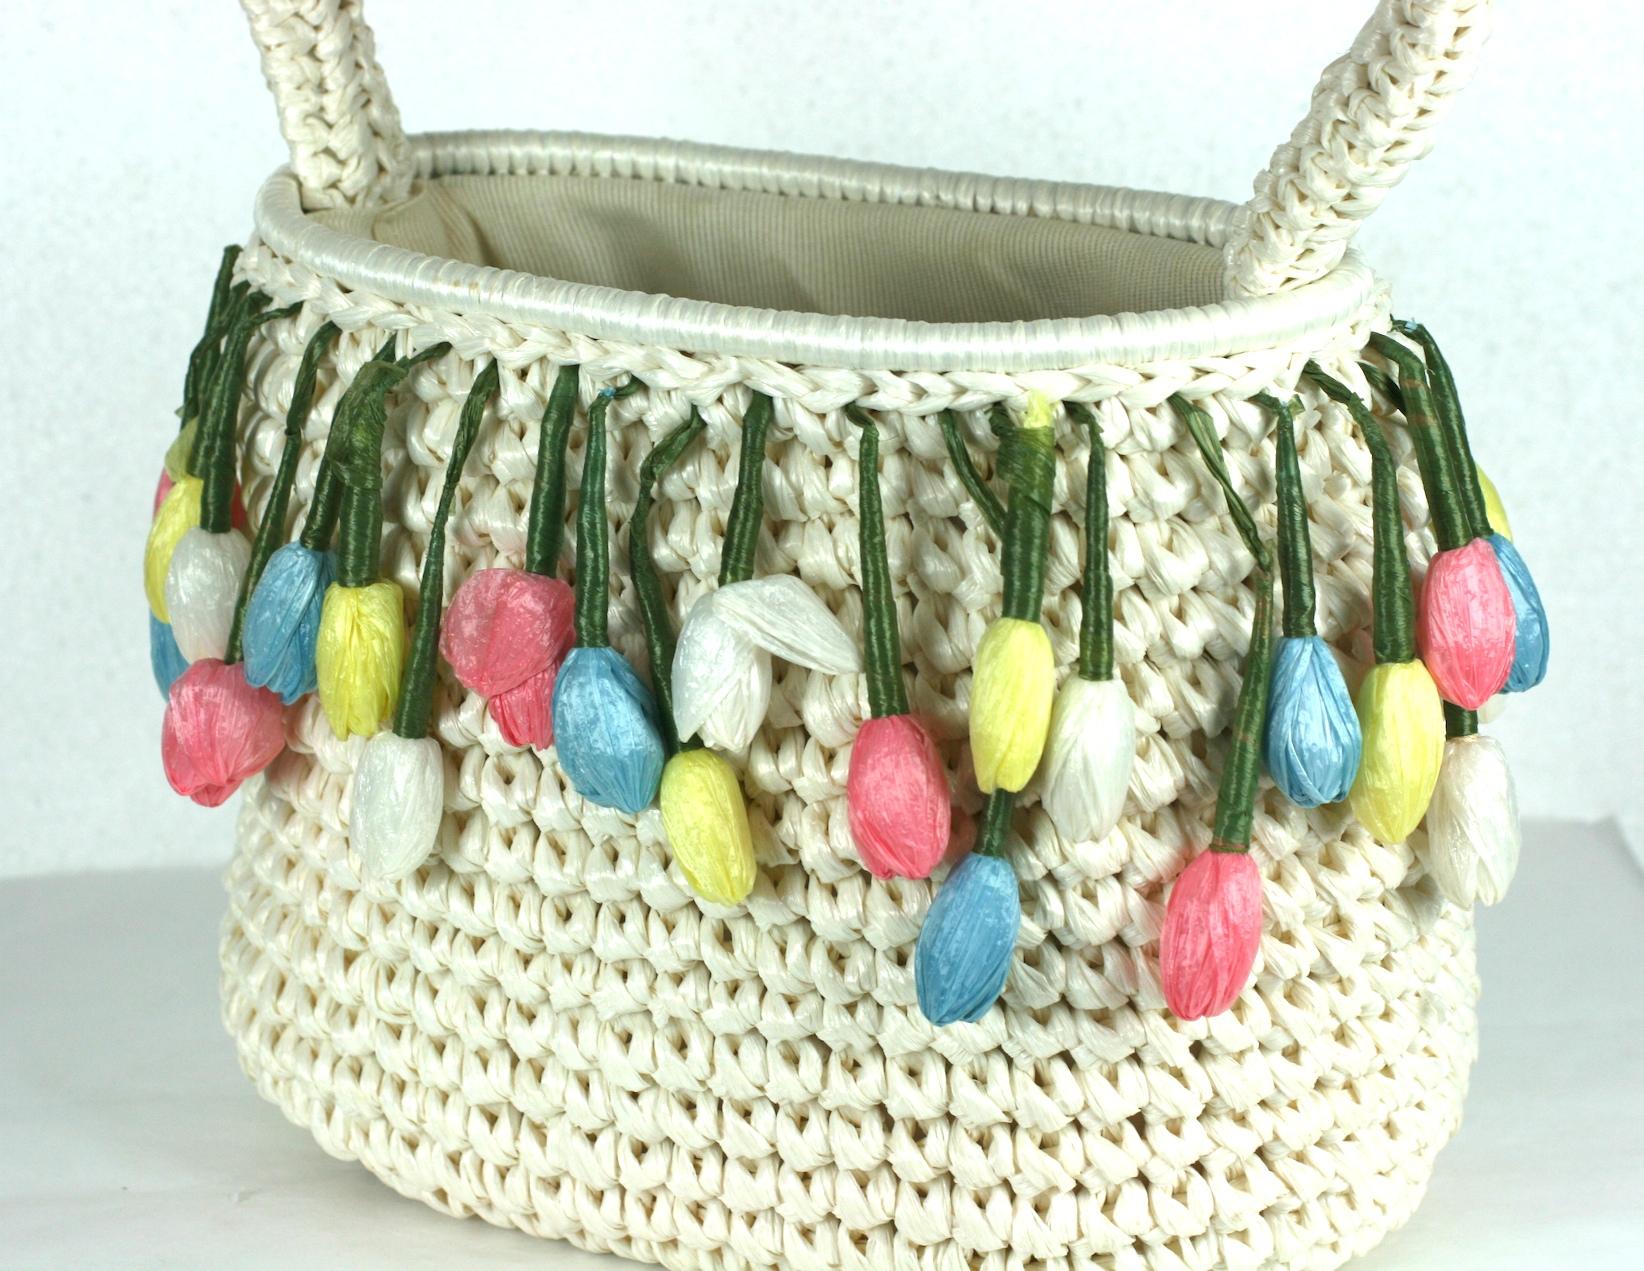 Charming Raffia Tulips Handbag from the 1960's. Ivory cellophane raffia is crochet to form the body of the open top bag. A fringe of handmade pastel raffia tulips decorates the upper edge. Handle adds 5